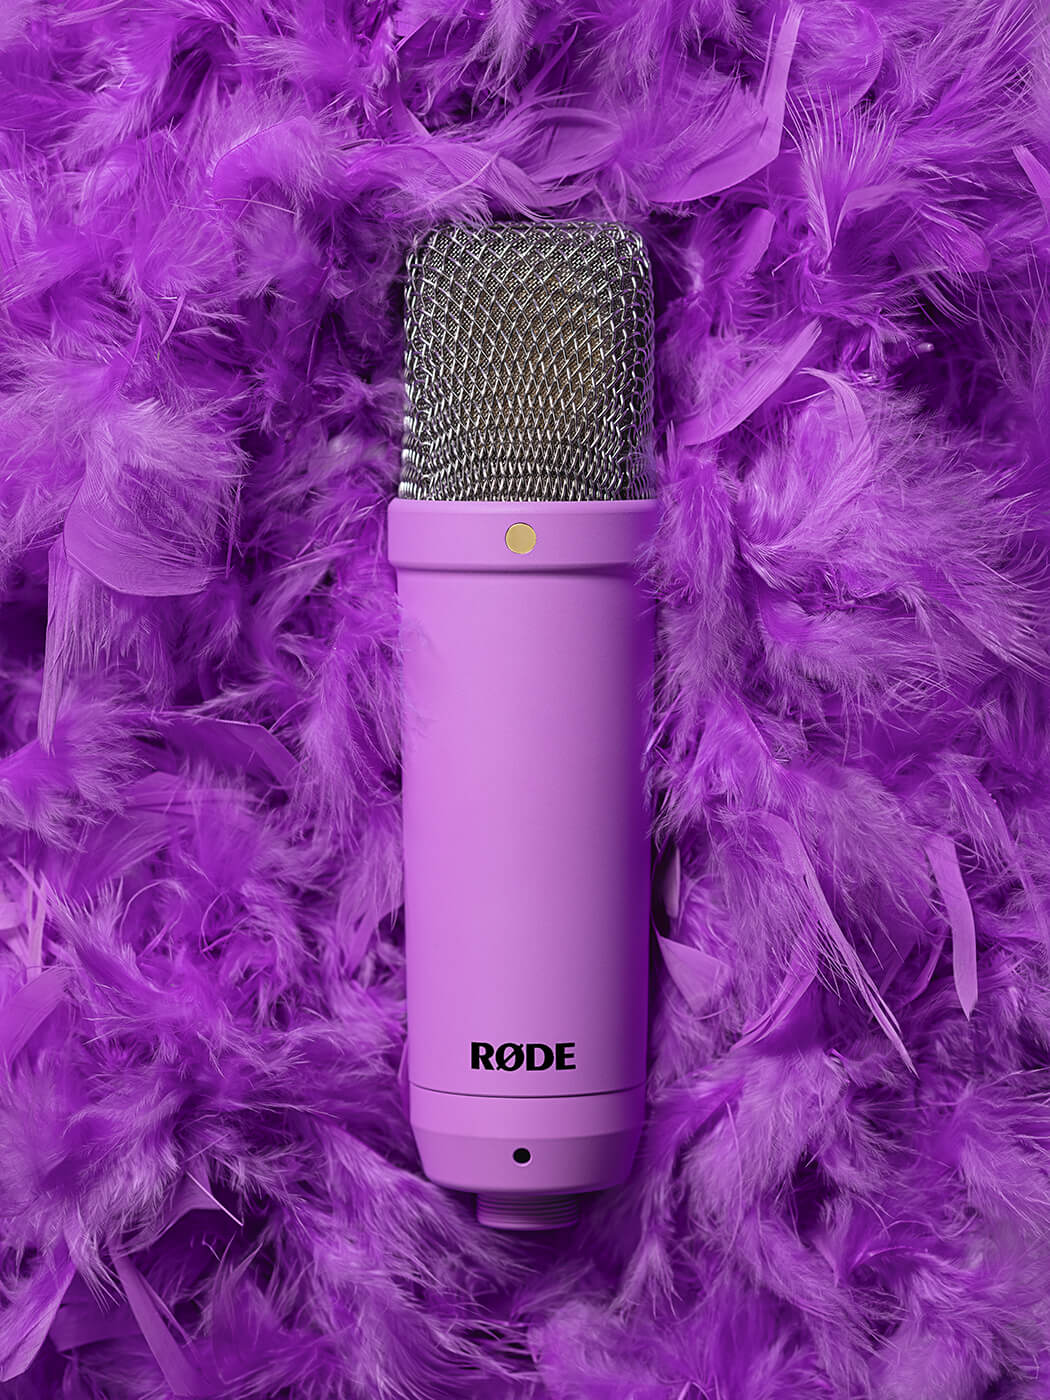 RØDE NT1 Signature Series condenser microphone in purple, photographed against a background of purple feathers